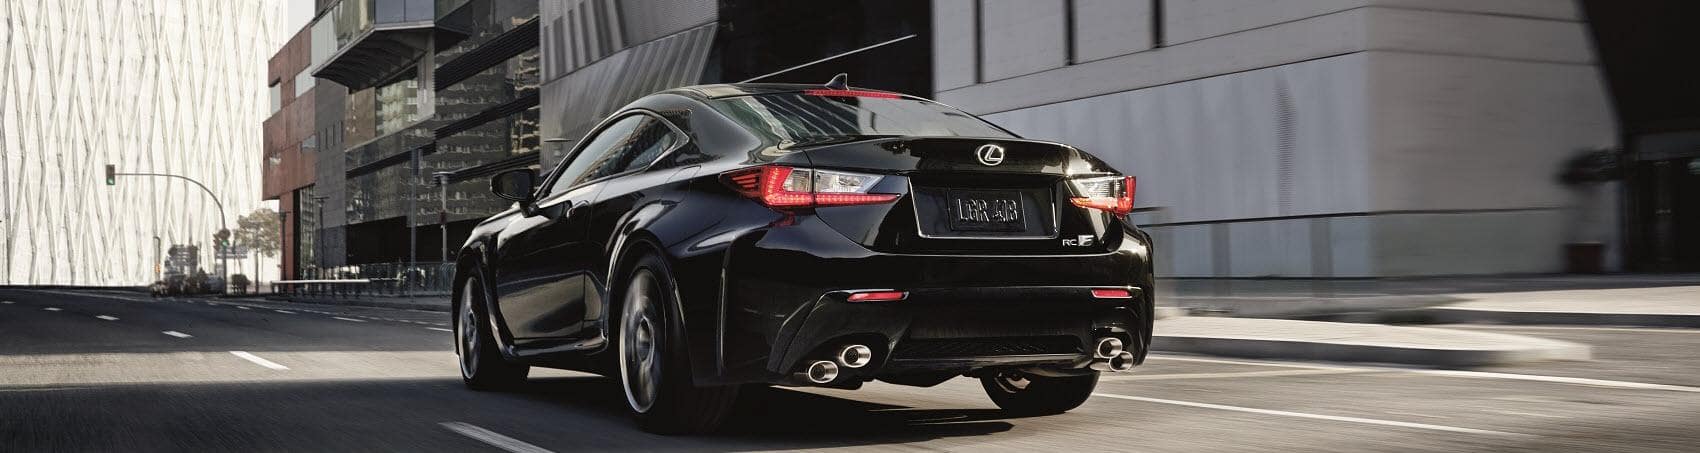 A close up of the back of a sleek black Lexus sedan as it speeds down a uncrowded city street.